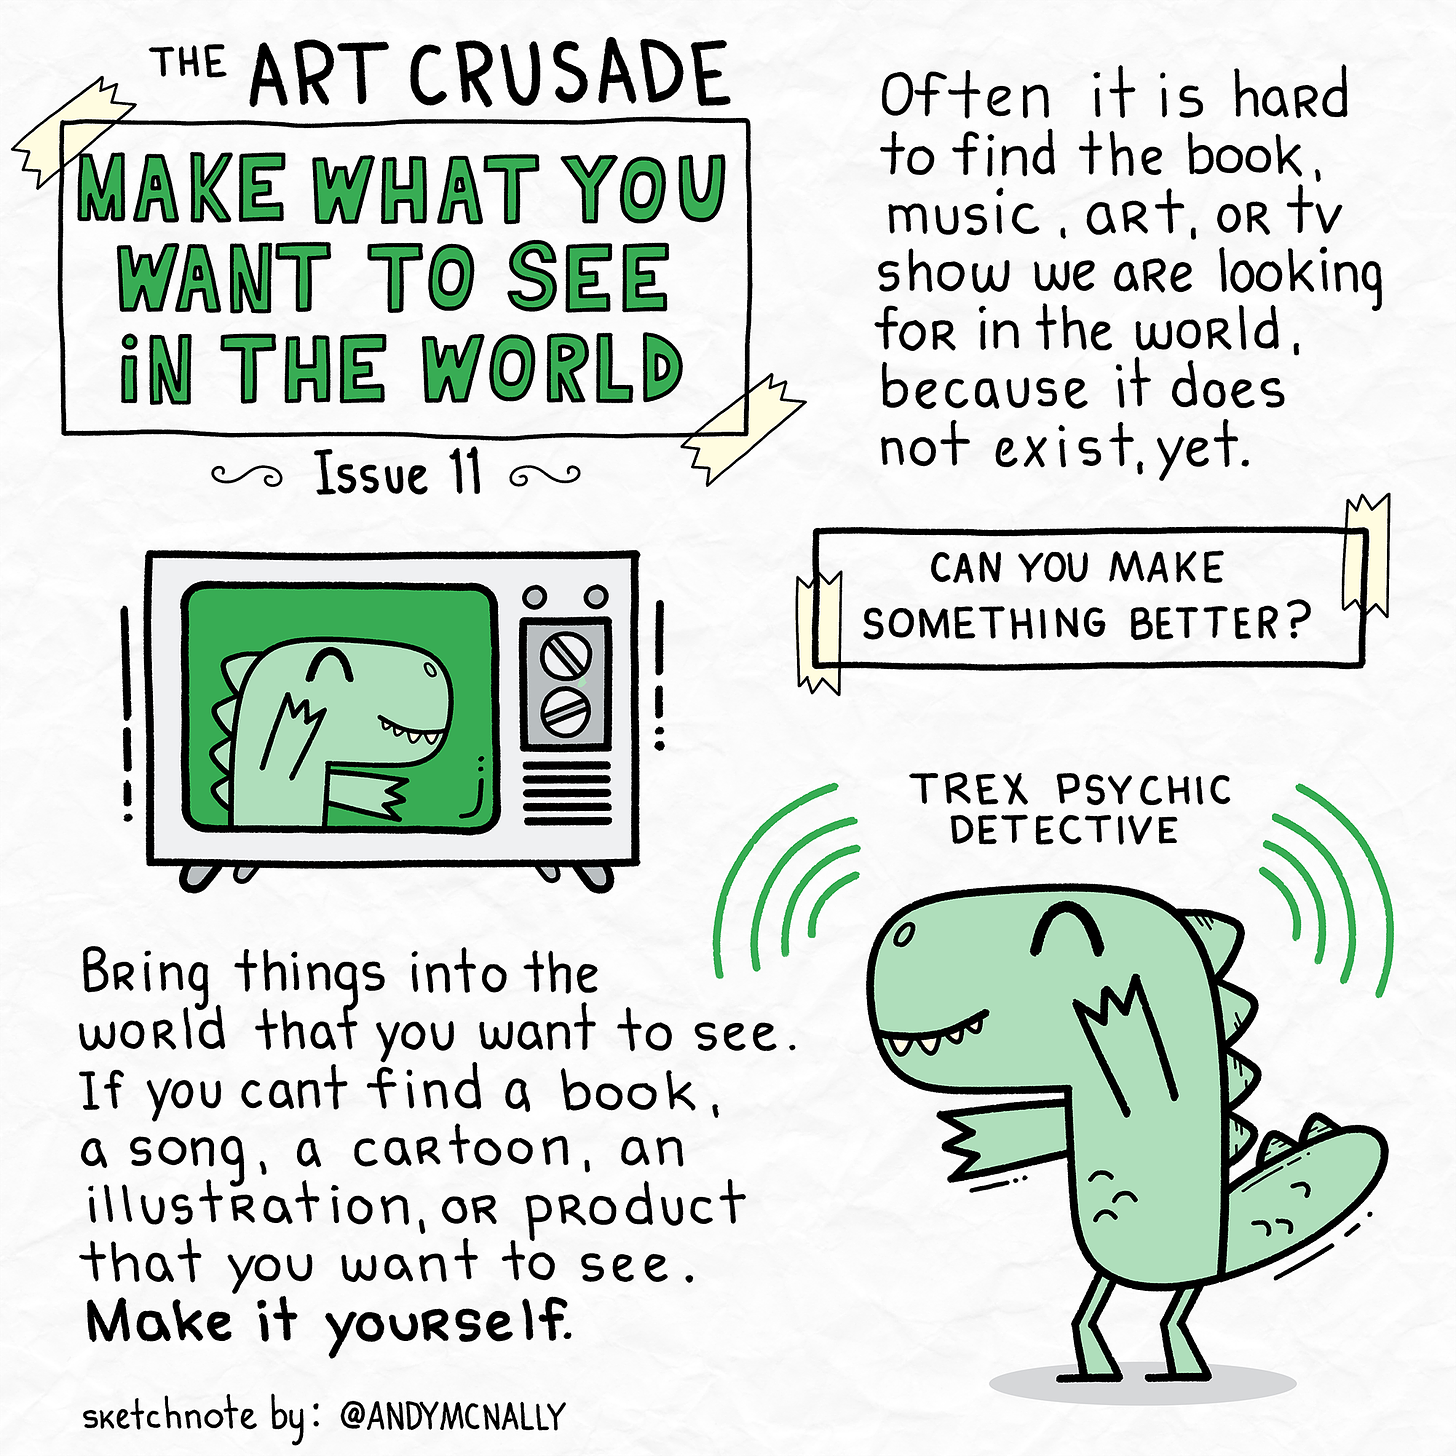 hand drawn dinosaurs and text encouraging you to make art yourself.